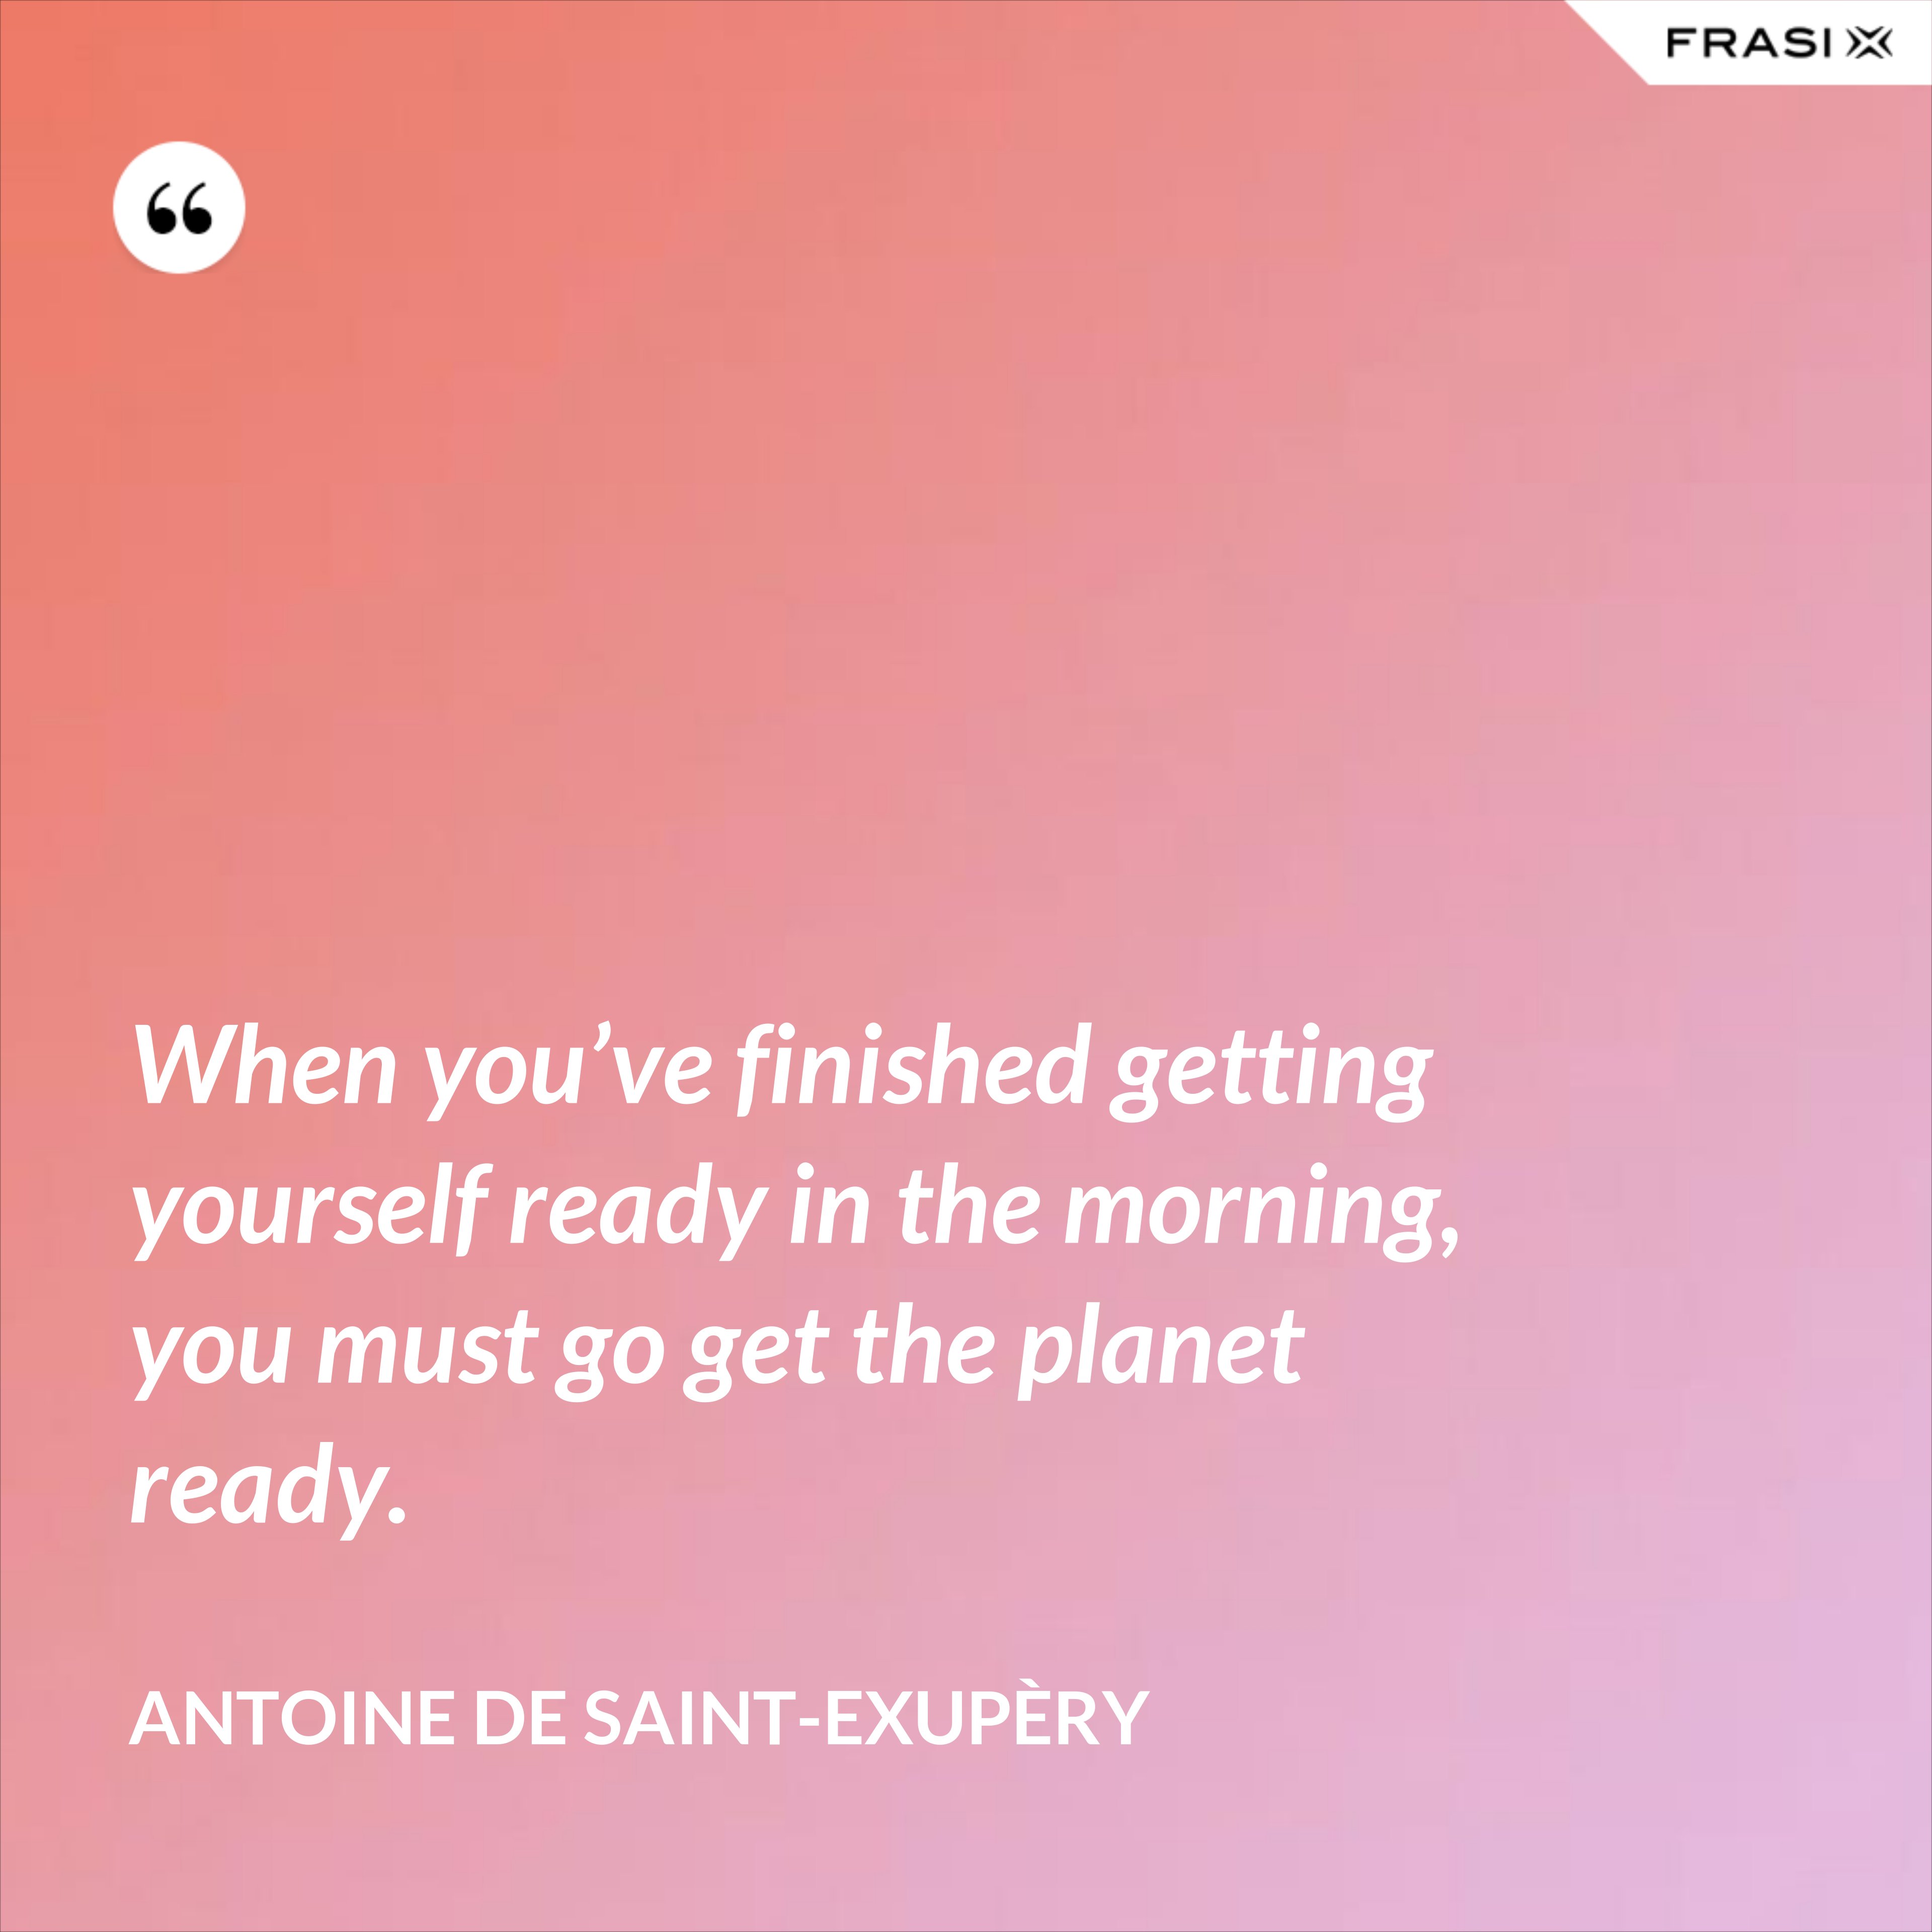 When you’ve finished getting yourself ready in the morning, you must go get the planet ready. - Antoine de Saint-Exupèry